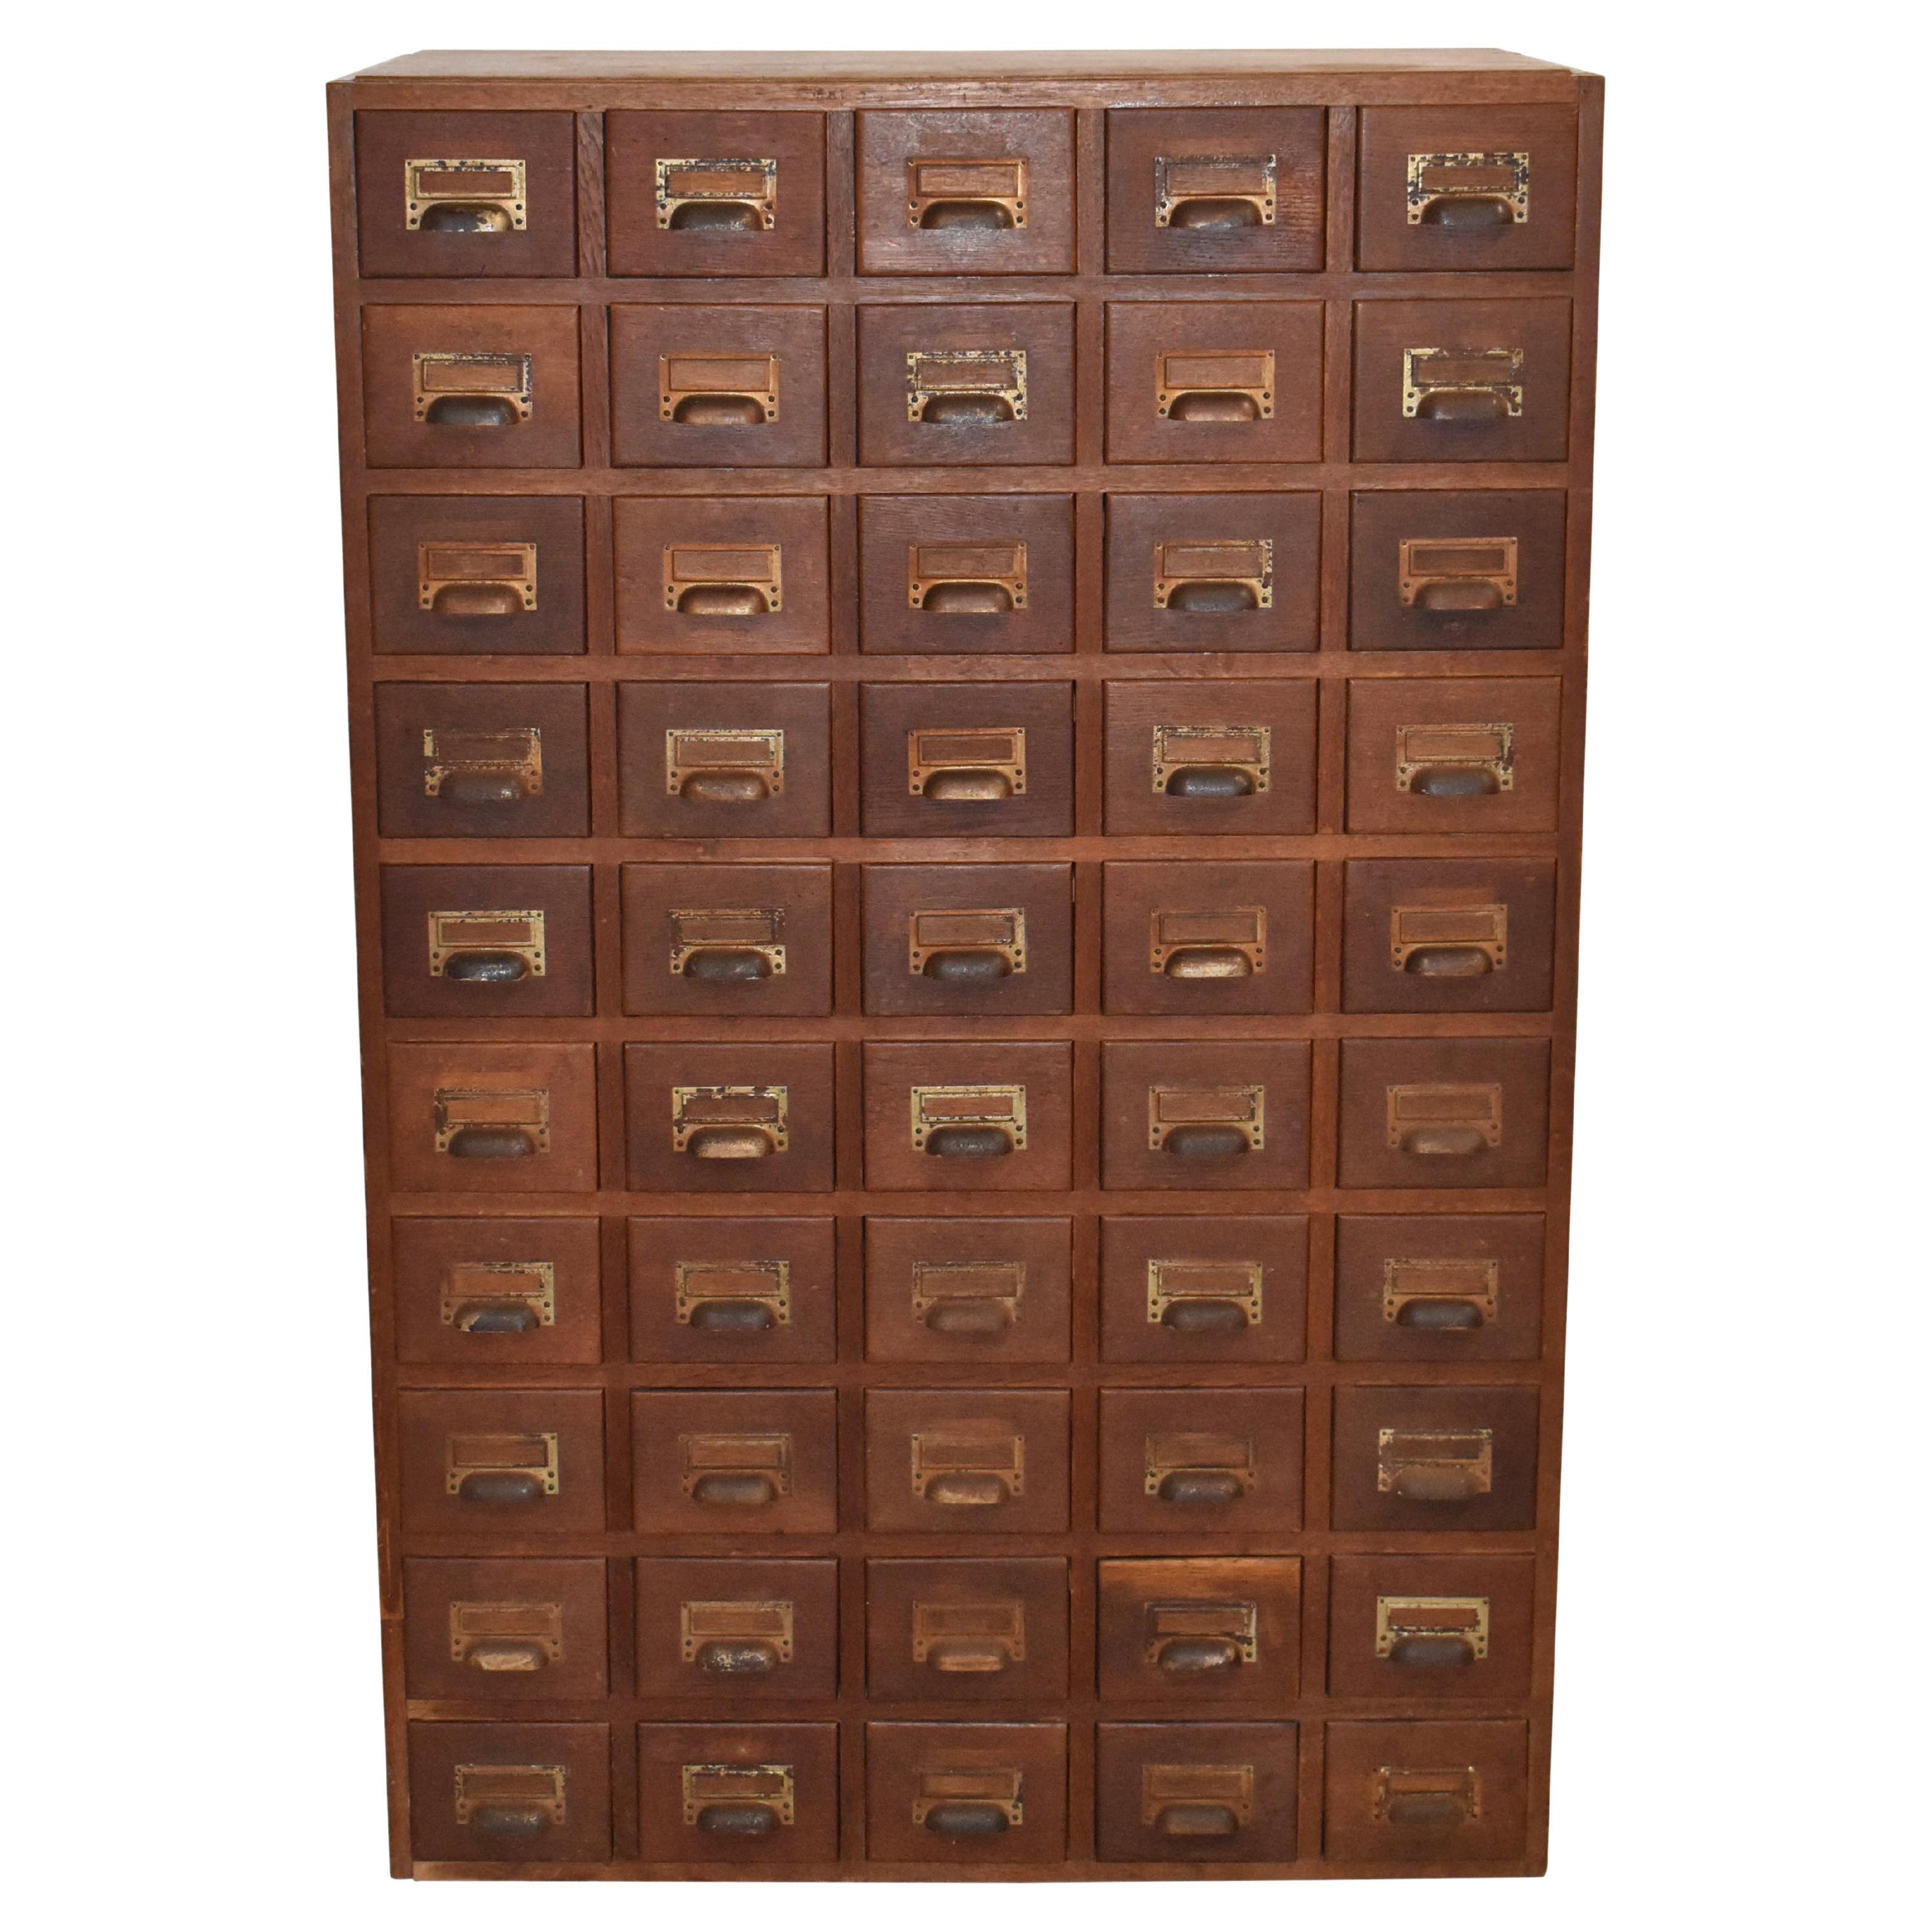 What is a card catalog called?